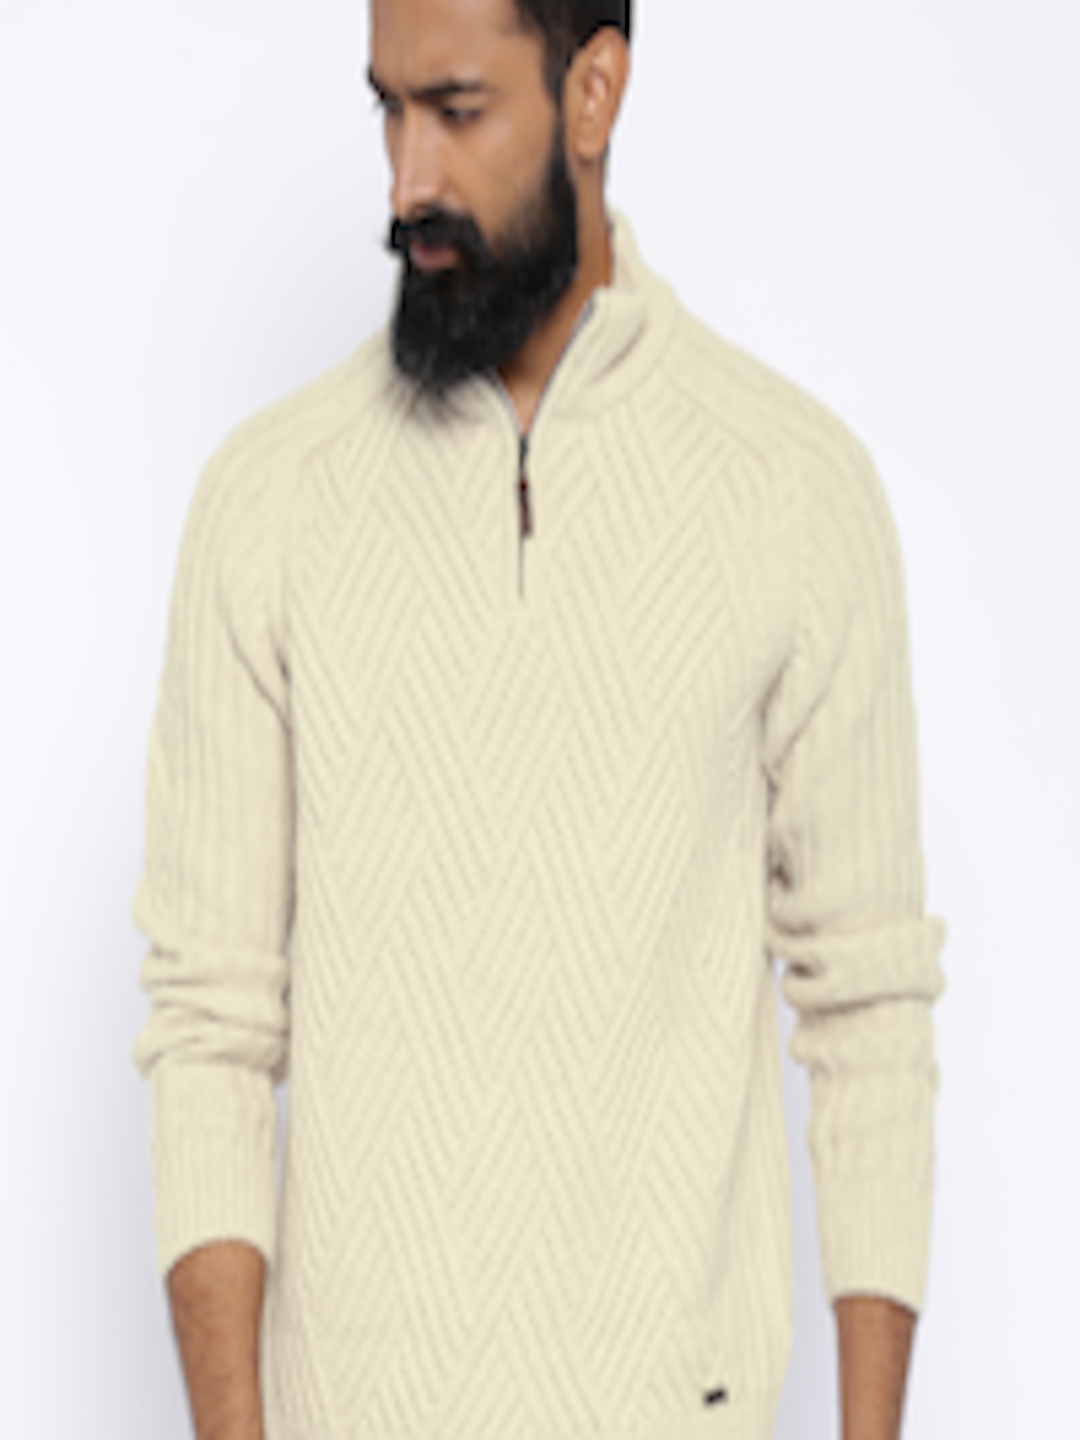 Buy Timberland Off White Woollen Sweater - Sweaters for Men 1425082 ...